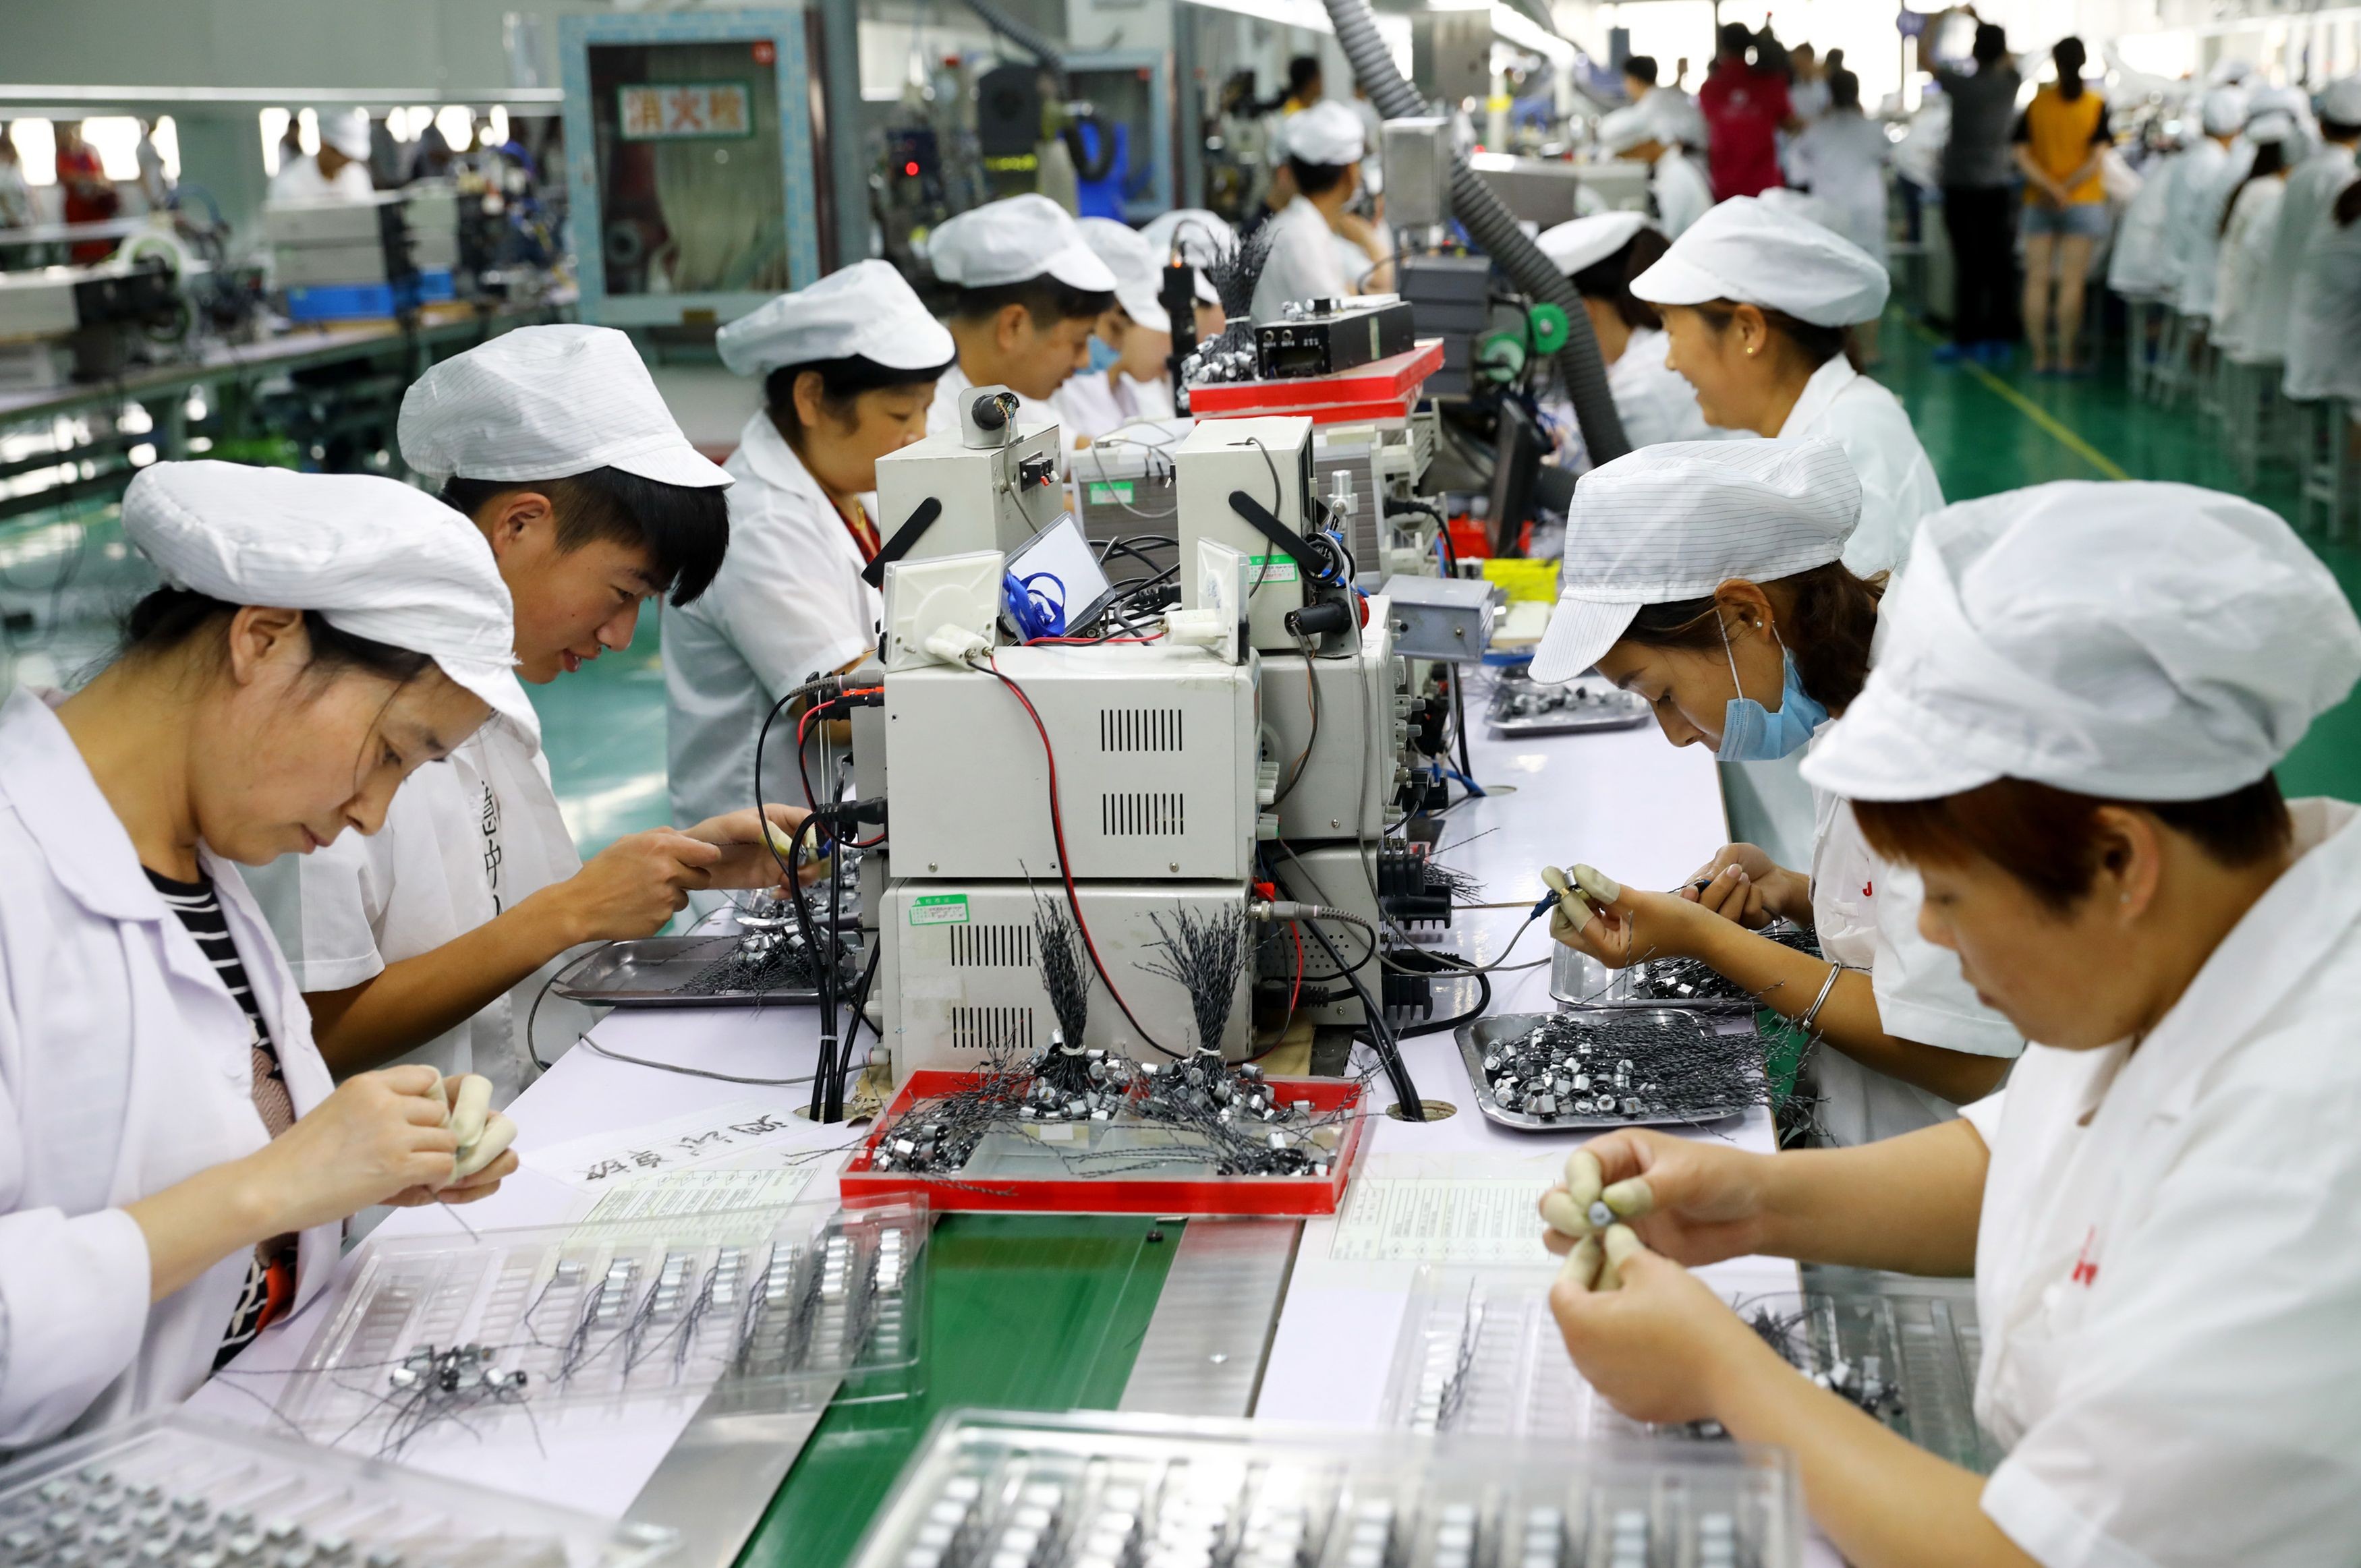 Staff work on a micro motor production line at a factory in Huaibei, Anhui province. Beijing wants banks to improve their internal systems to encourage lending to small business. Photo: AFP